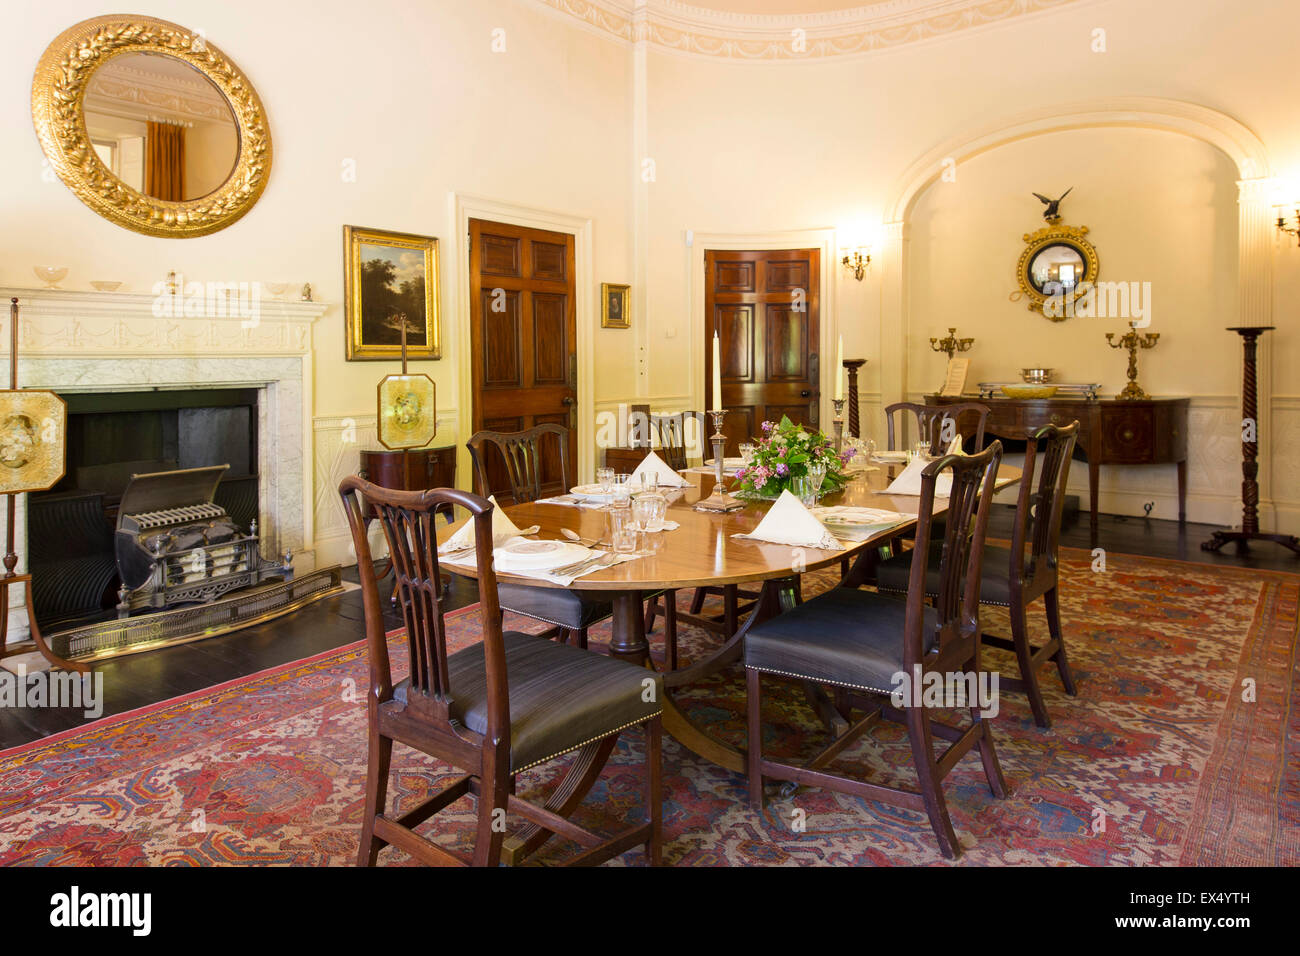 Dining room, Greenway House, manor of Agatha Christie, Greenway, Devon, Southern England, England, United Kingdom Stock Photo